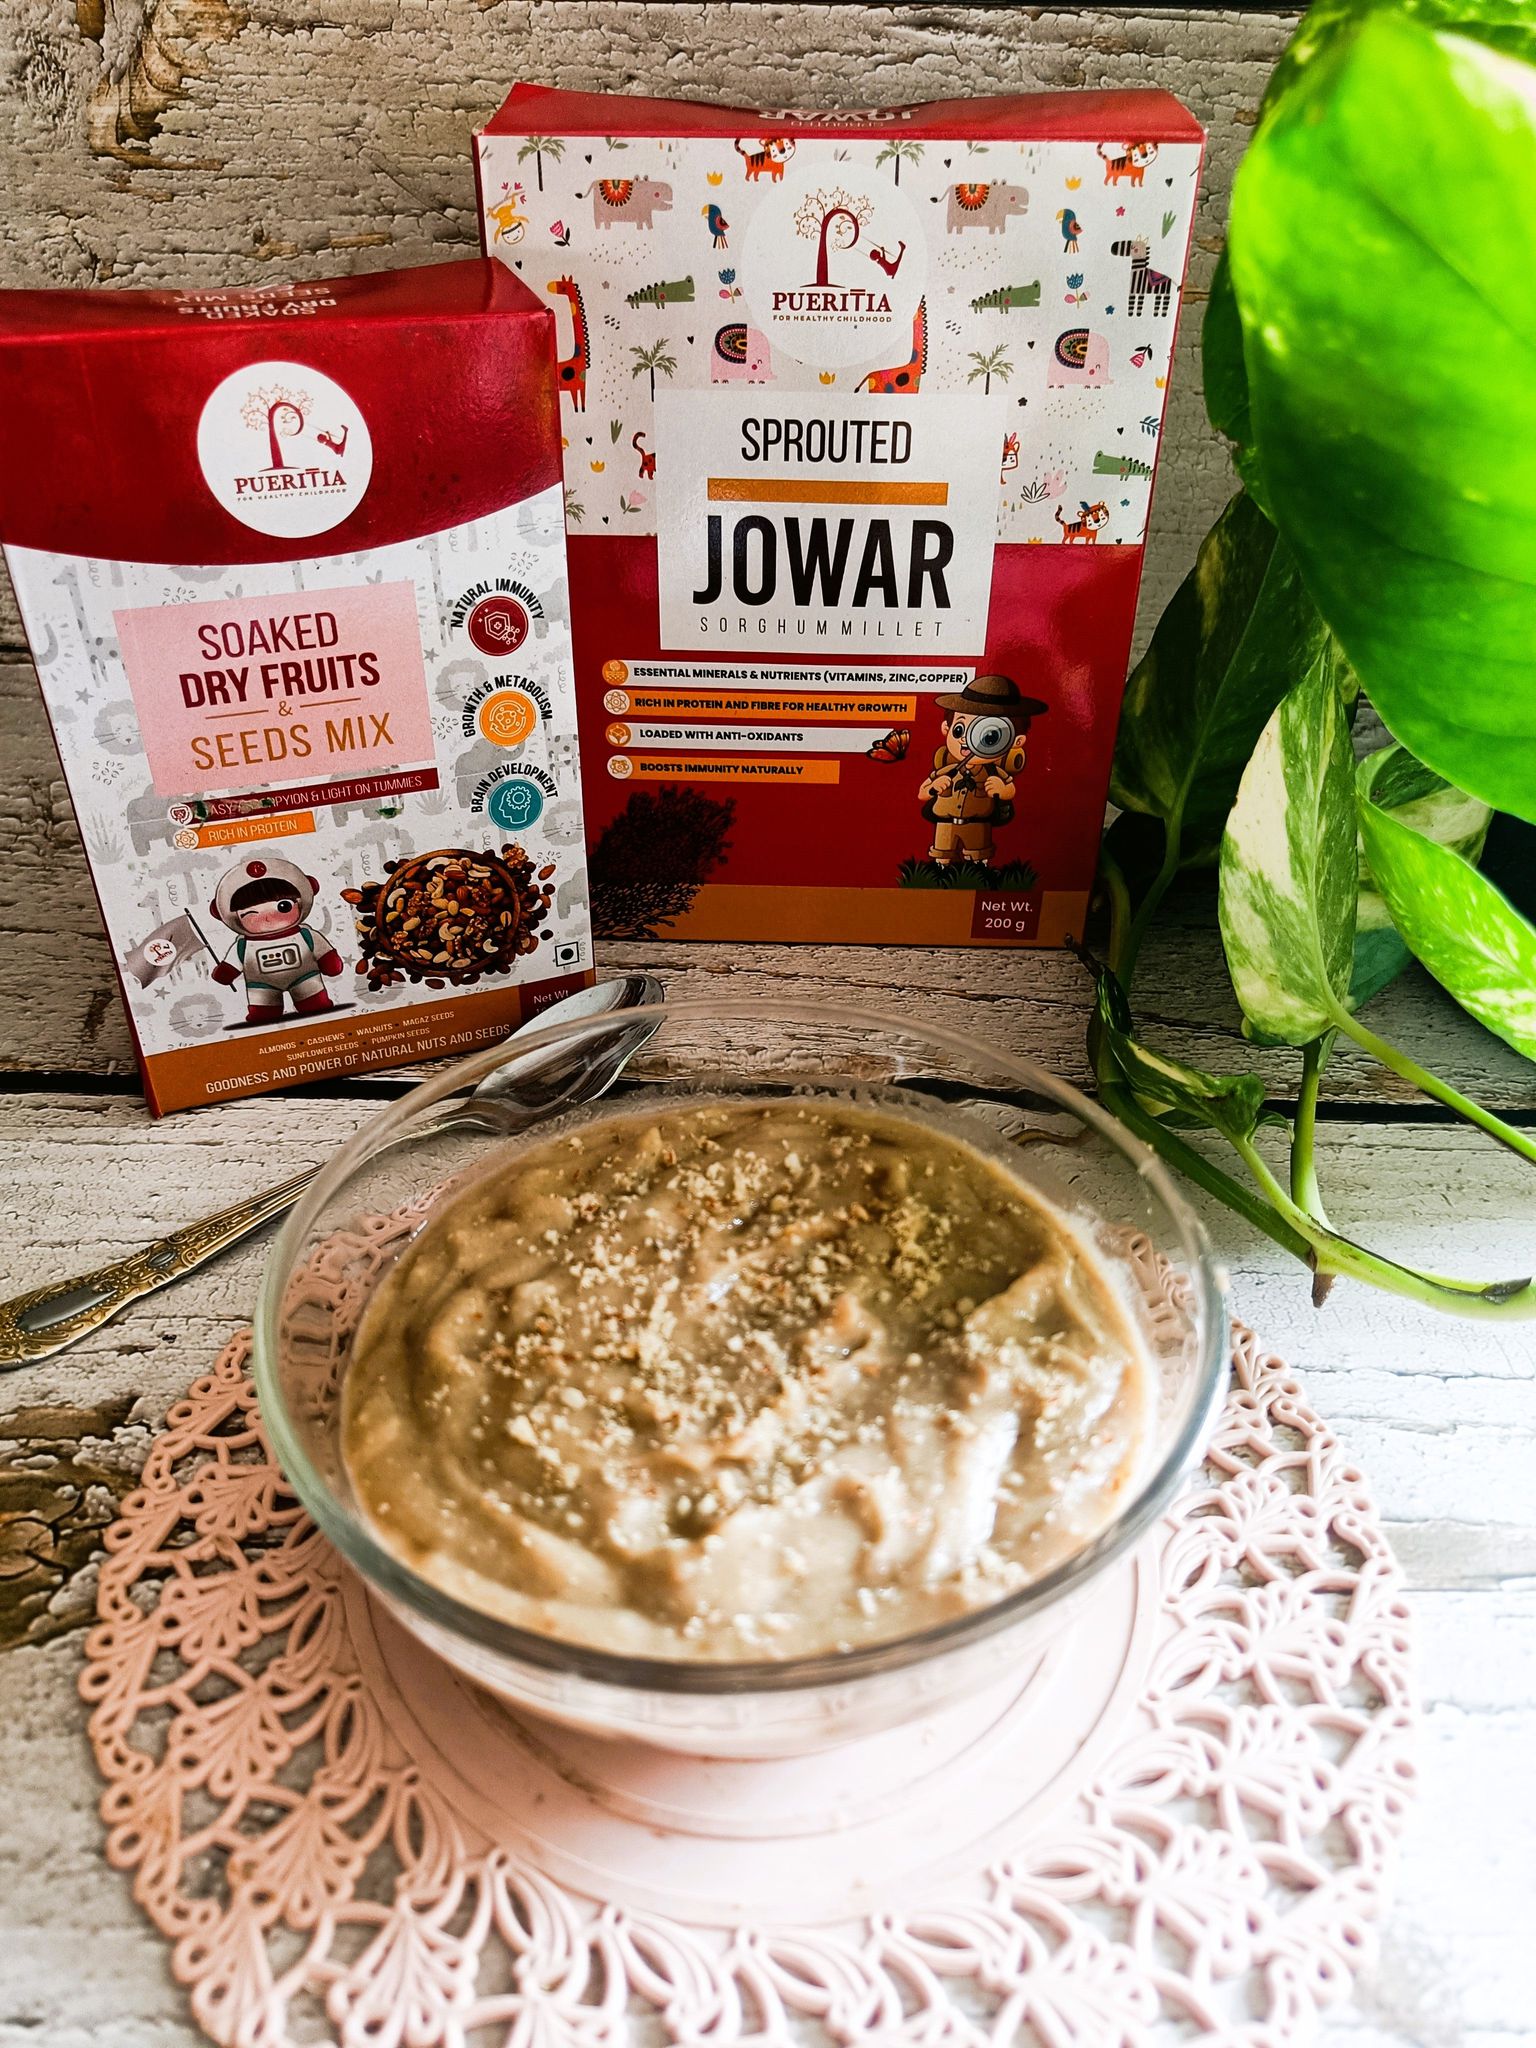 Combo of Sprouted Jowar Powder and Soaked Dry Fruit Powder